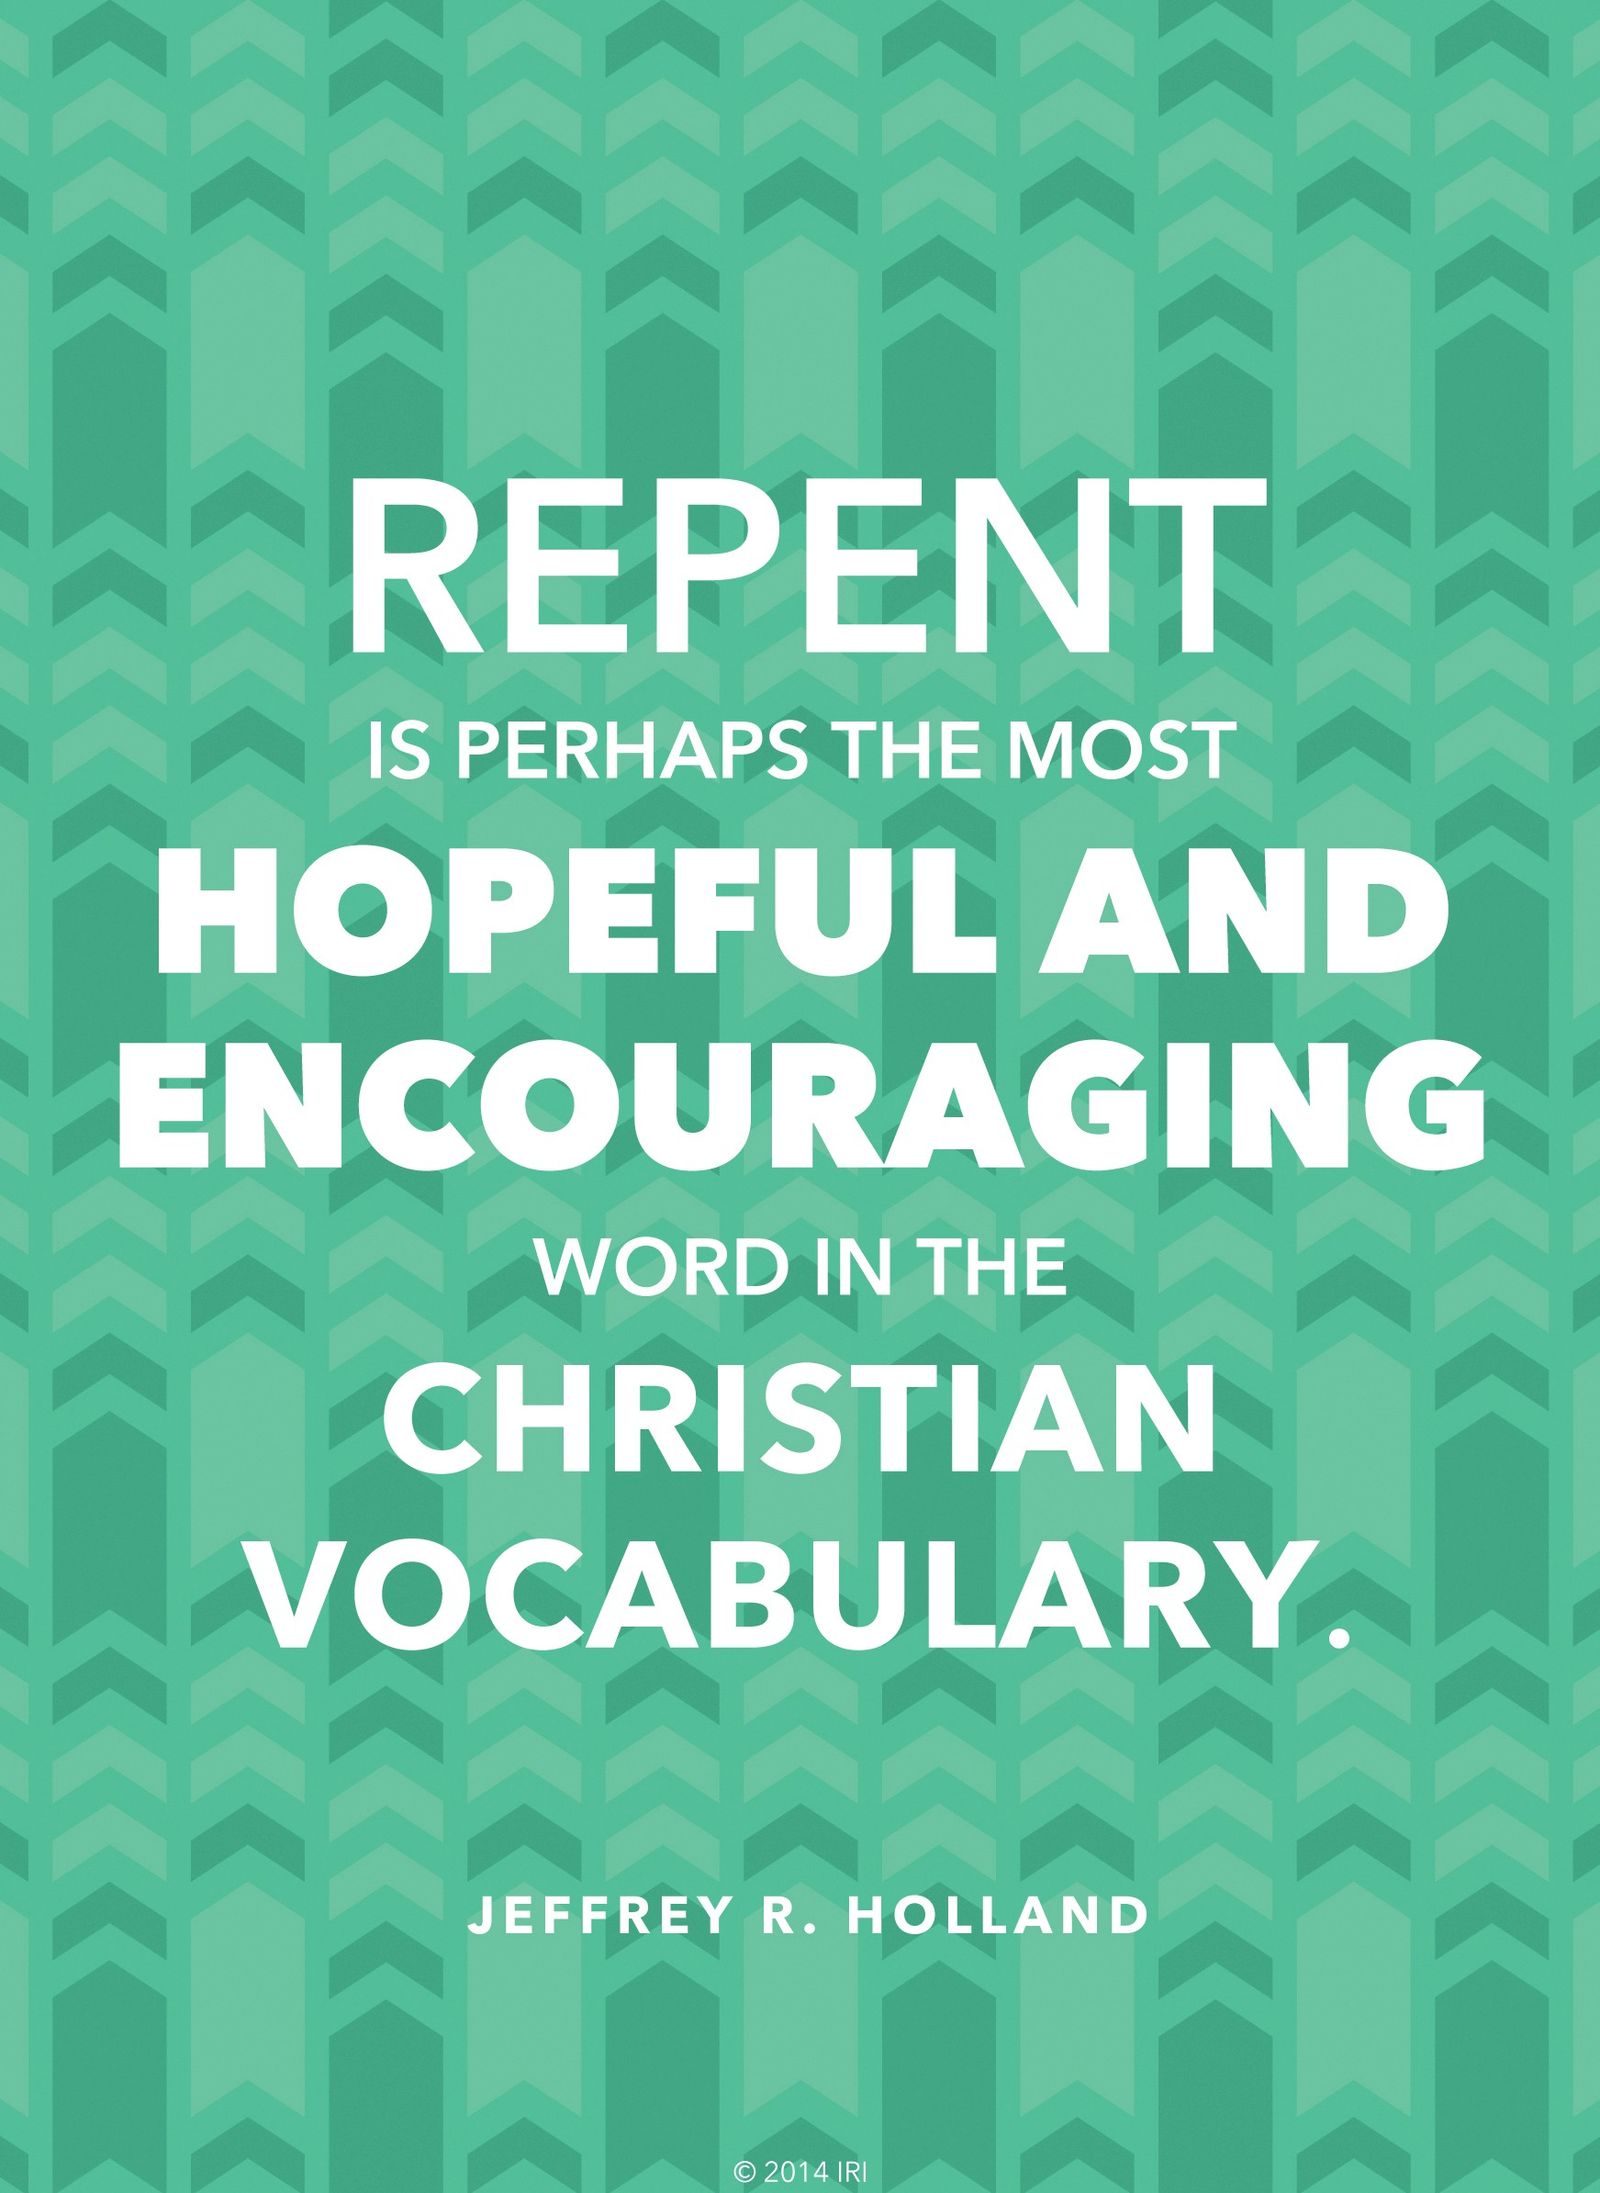 “Repent is perhaps the most hopeful and encouraging word in the Christian vocabulary.”—Elder Jeffrey R. Holland, “Broken Things to Mend”